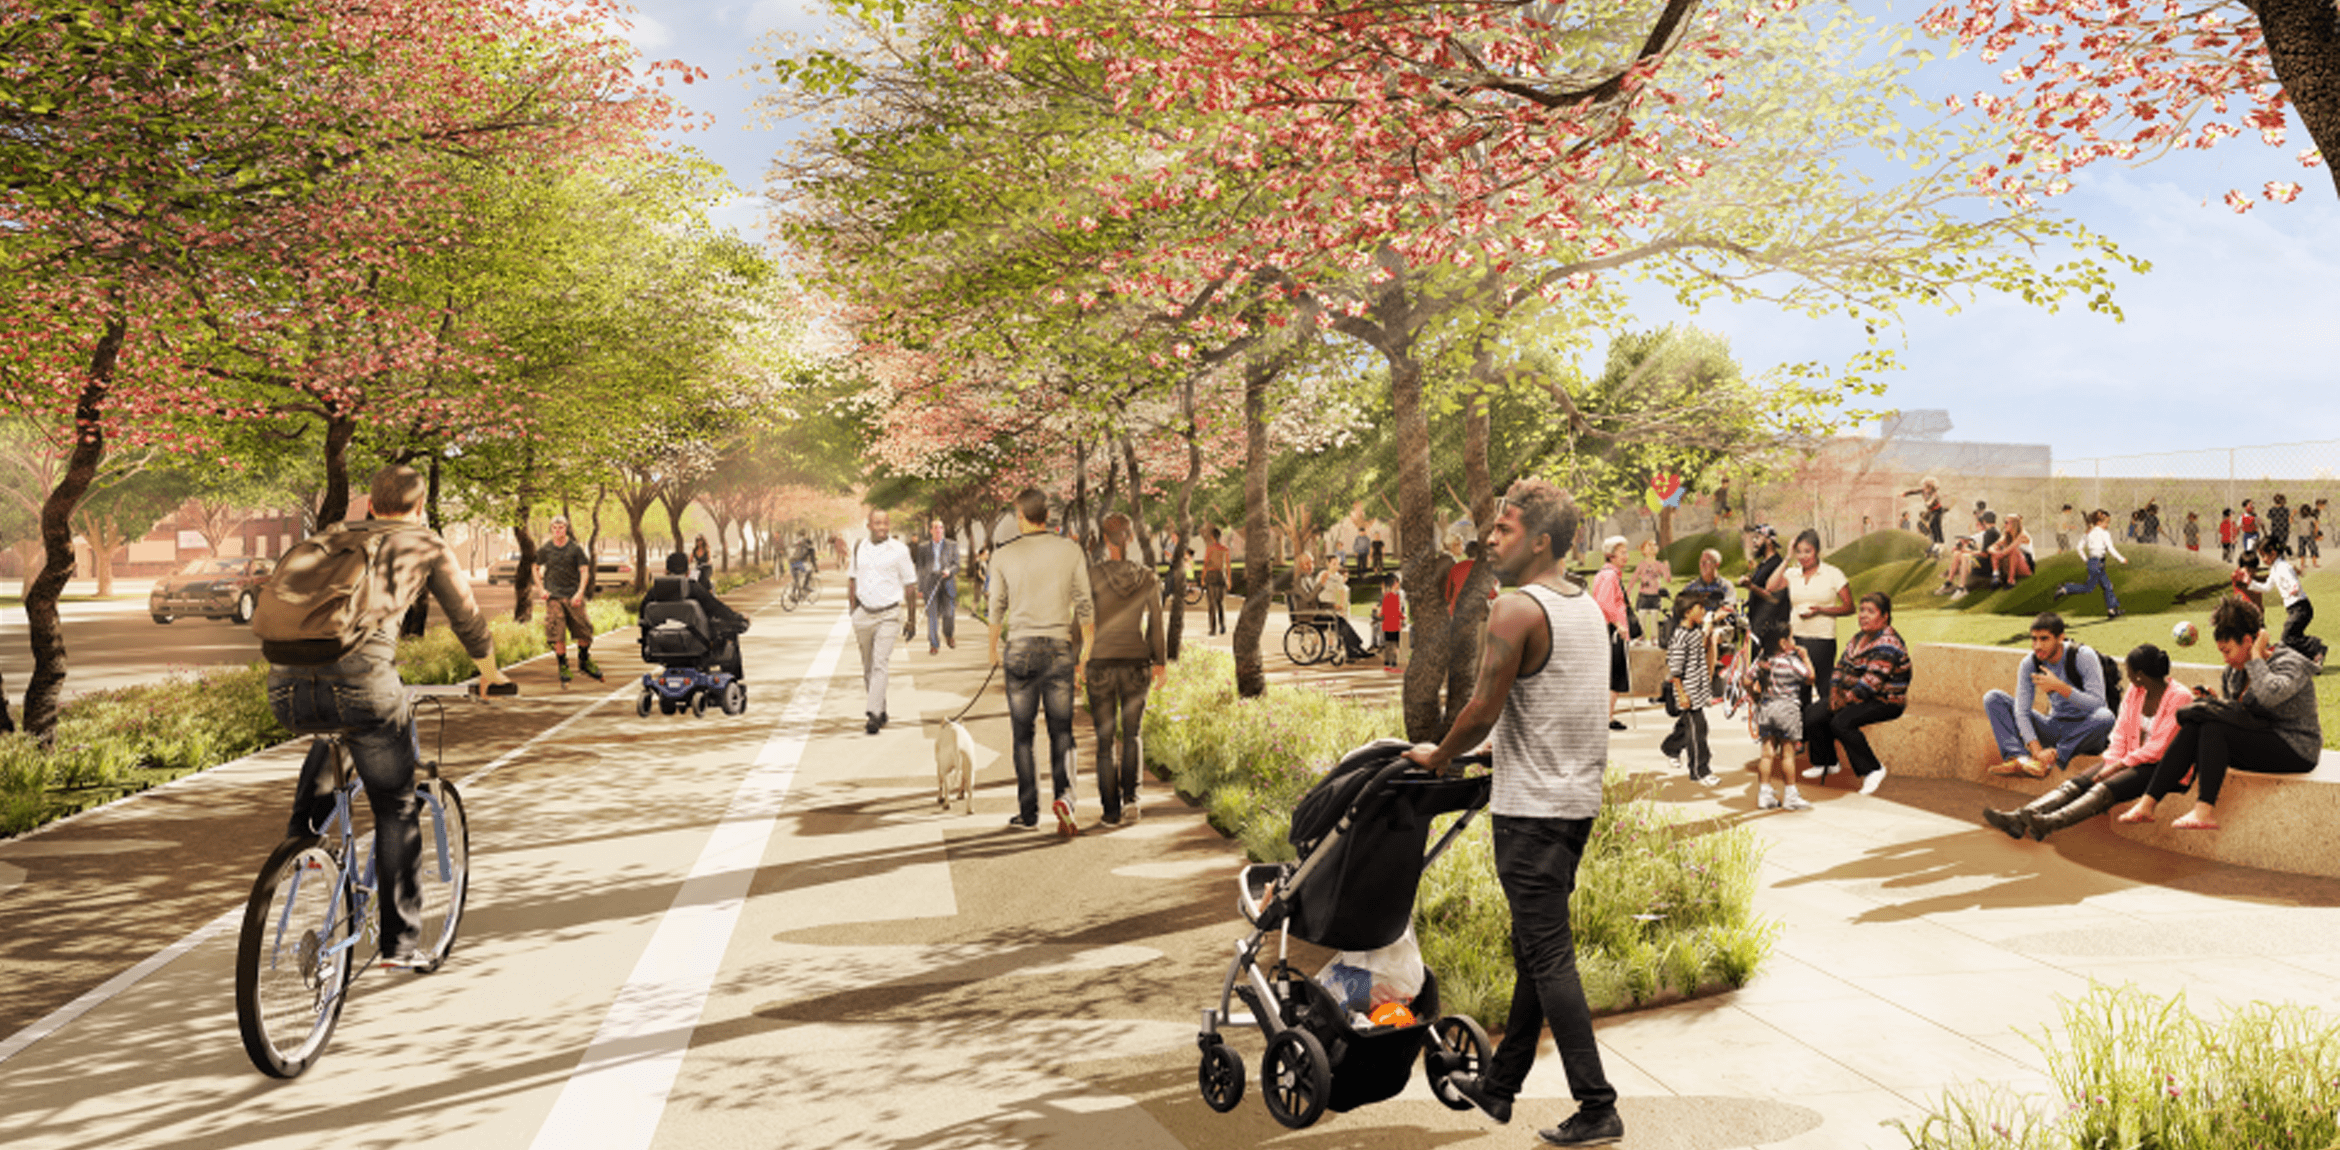 A rendered image of people a crowded park with large trees and various recreational spaces